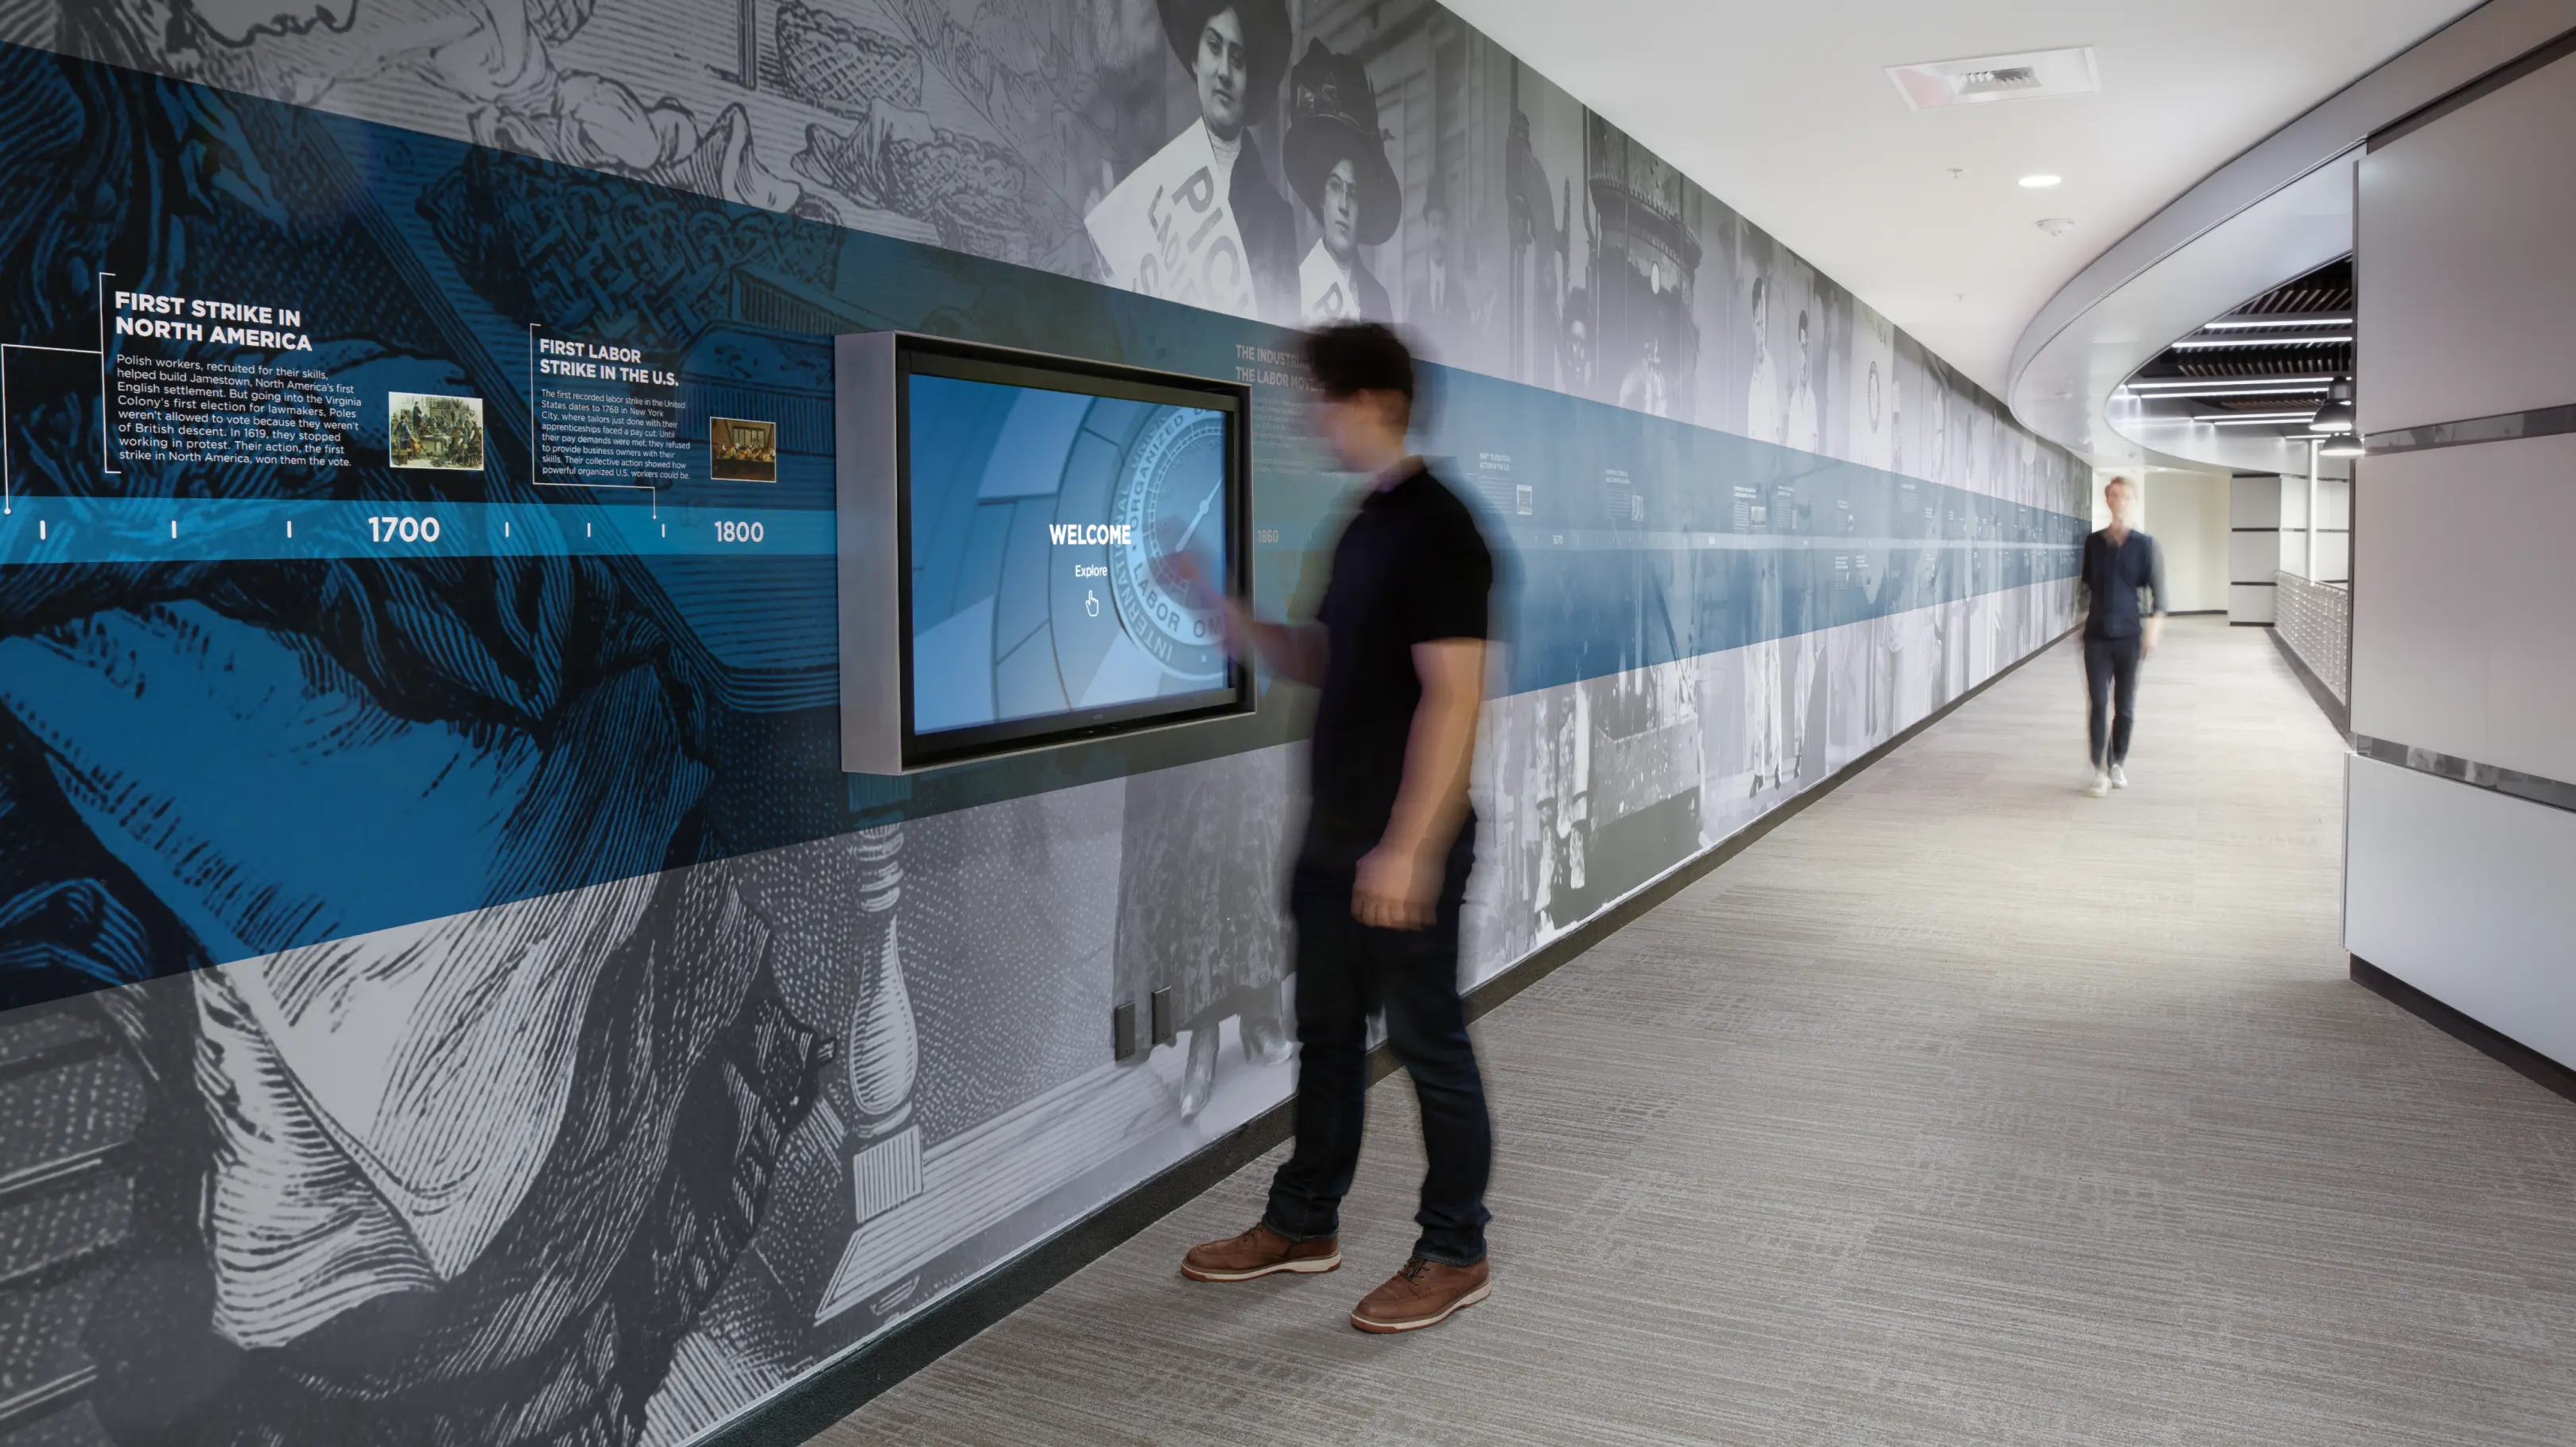 A man stands in front of a timeline wall graphic, interacting with a wall-mounted touchscreen interface